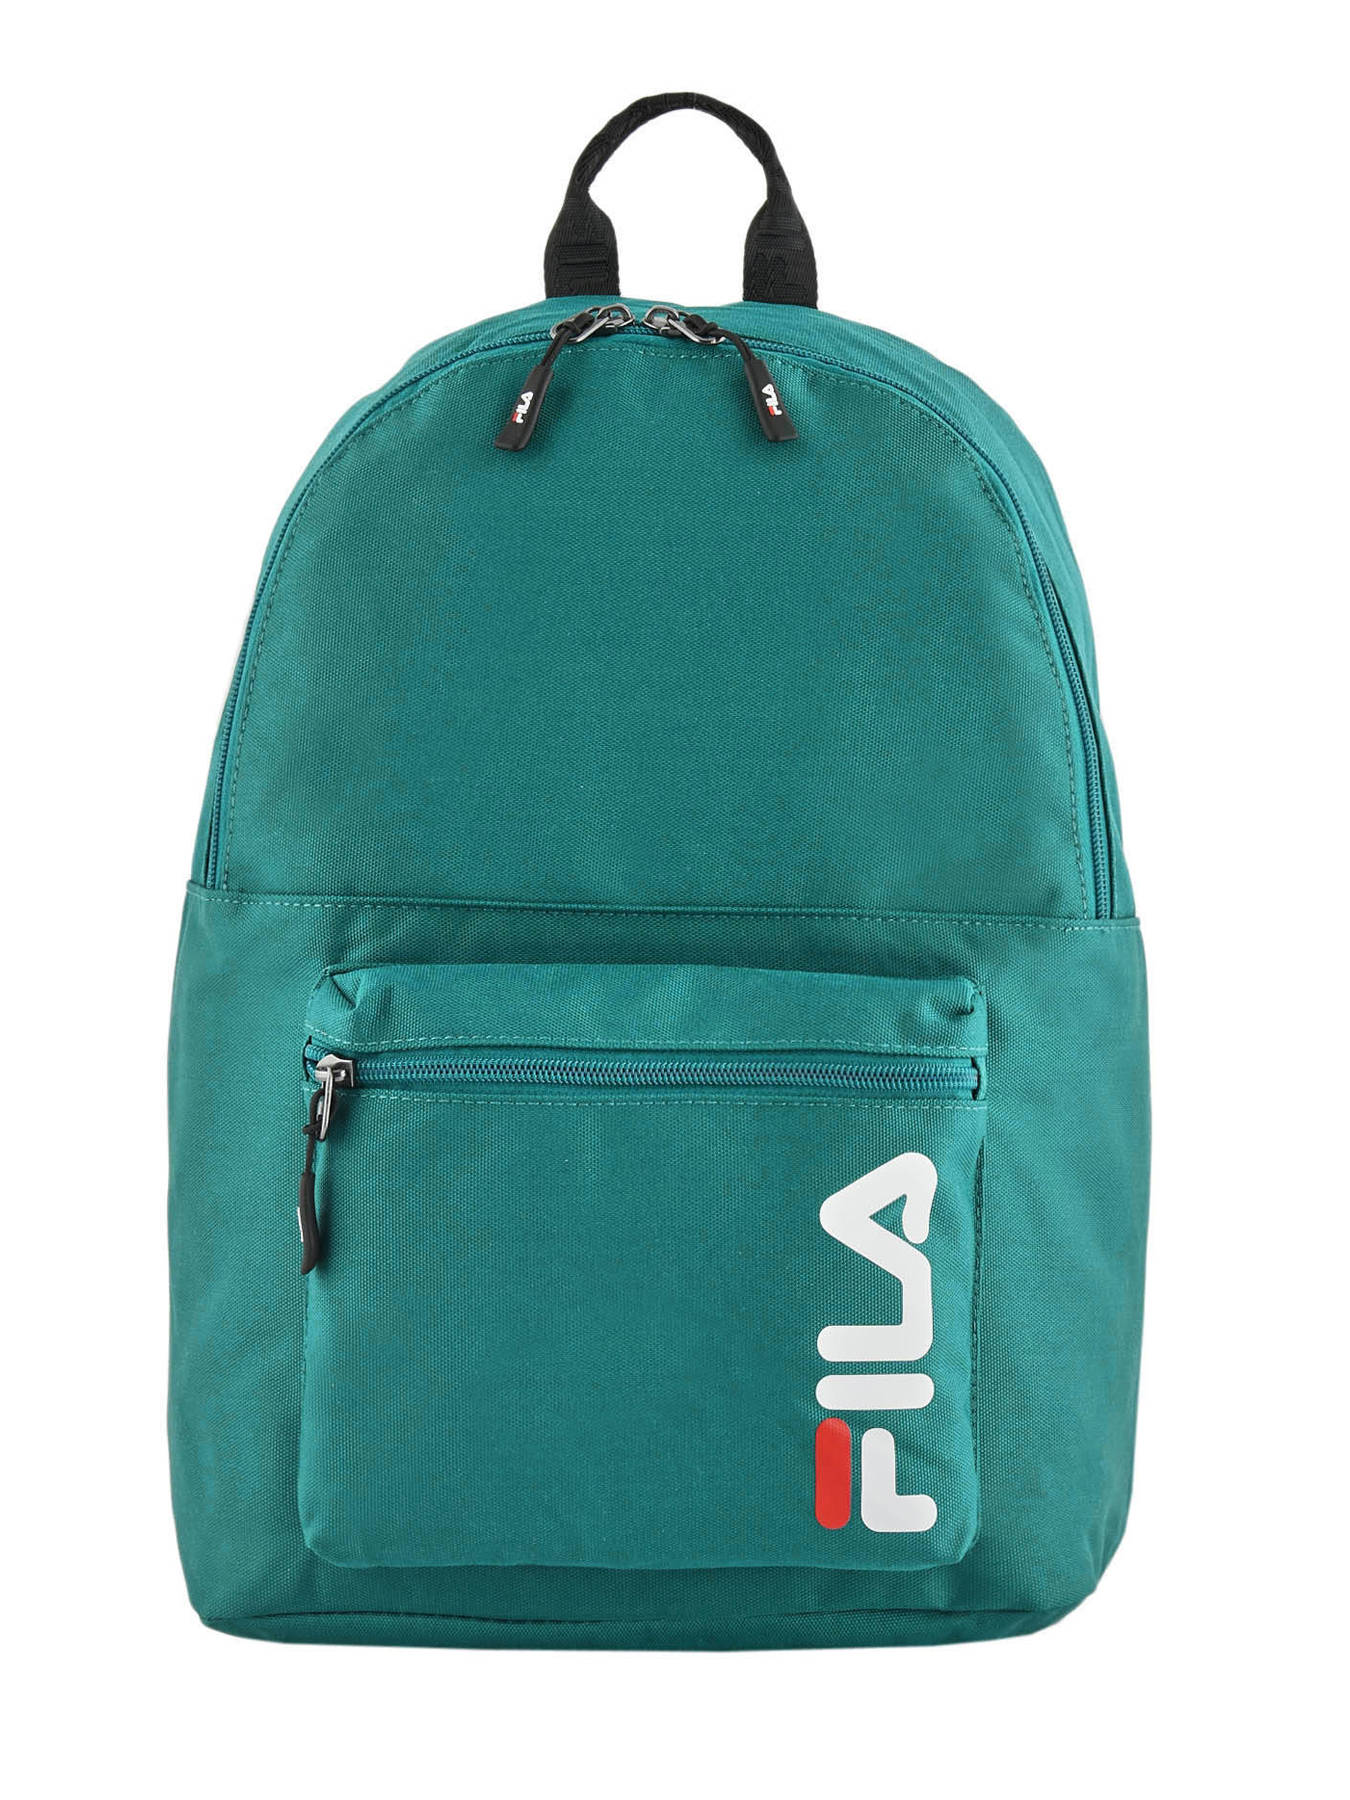 Fila Backpack 685005 best prices